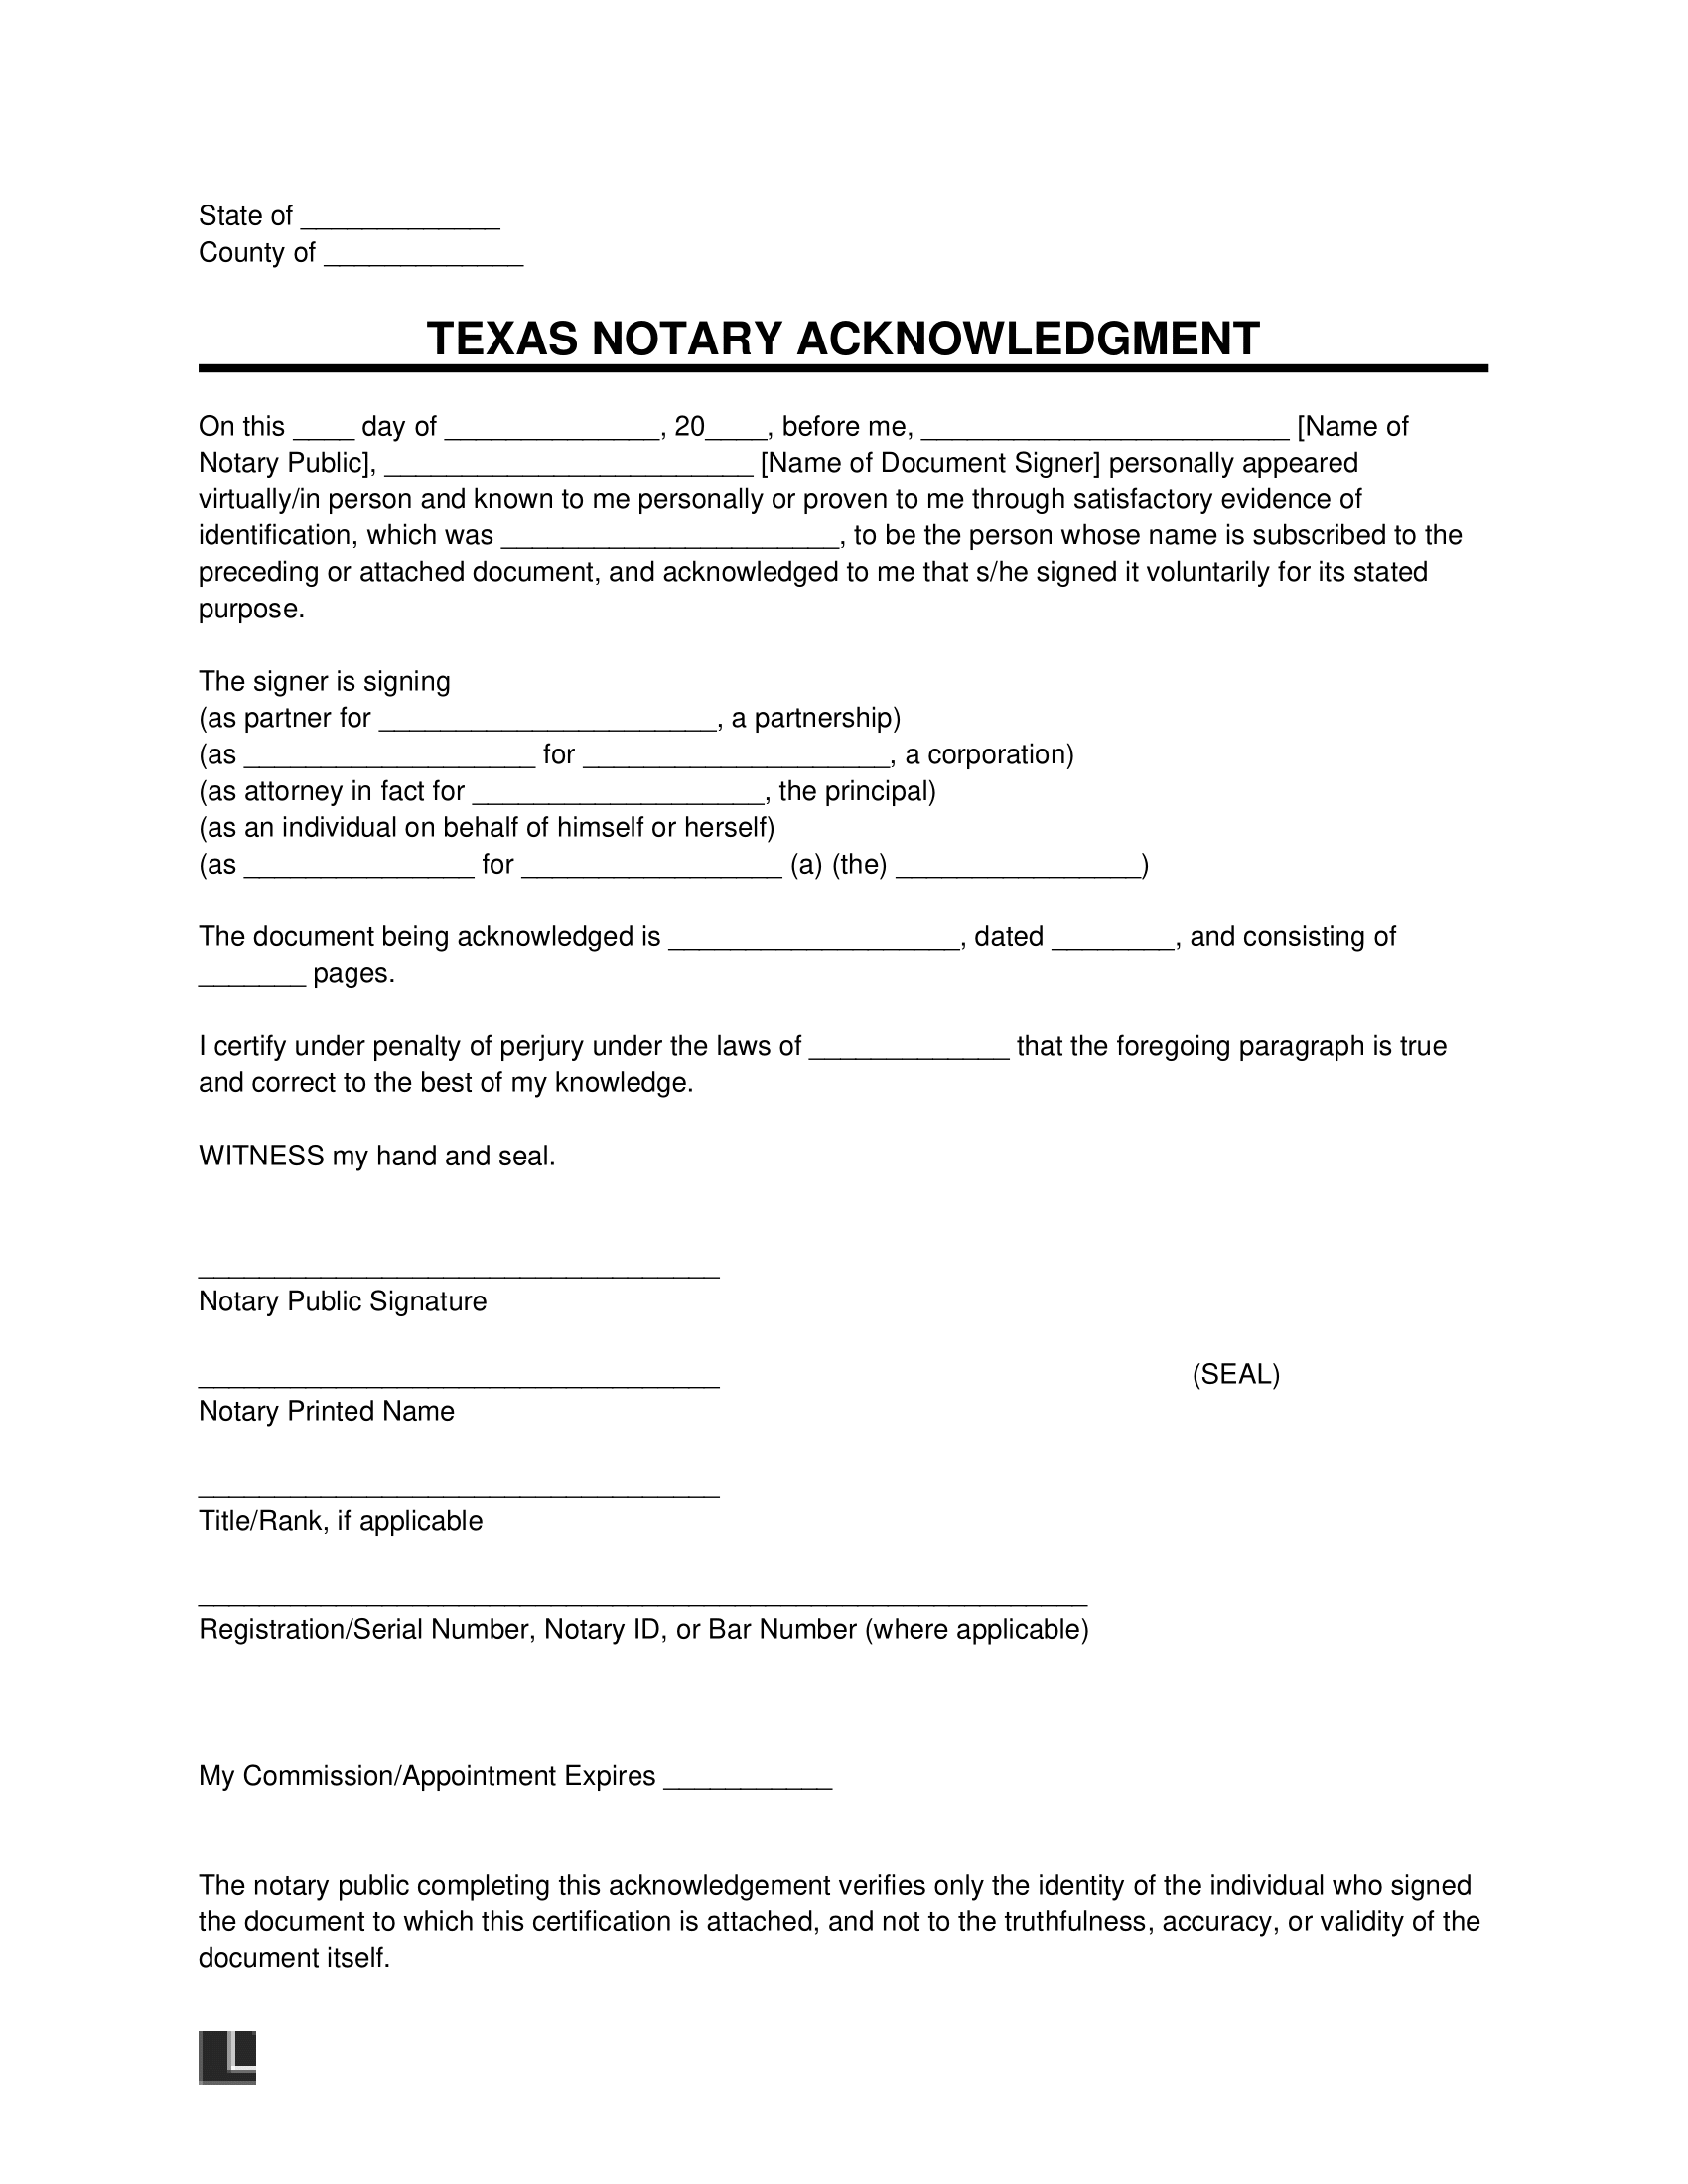 Texas Notary Acknowledgment Form